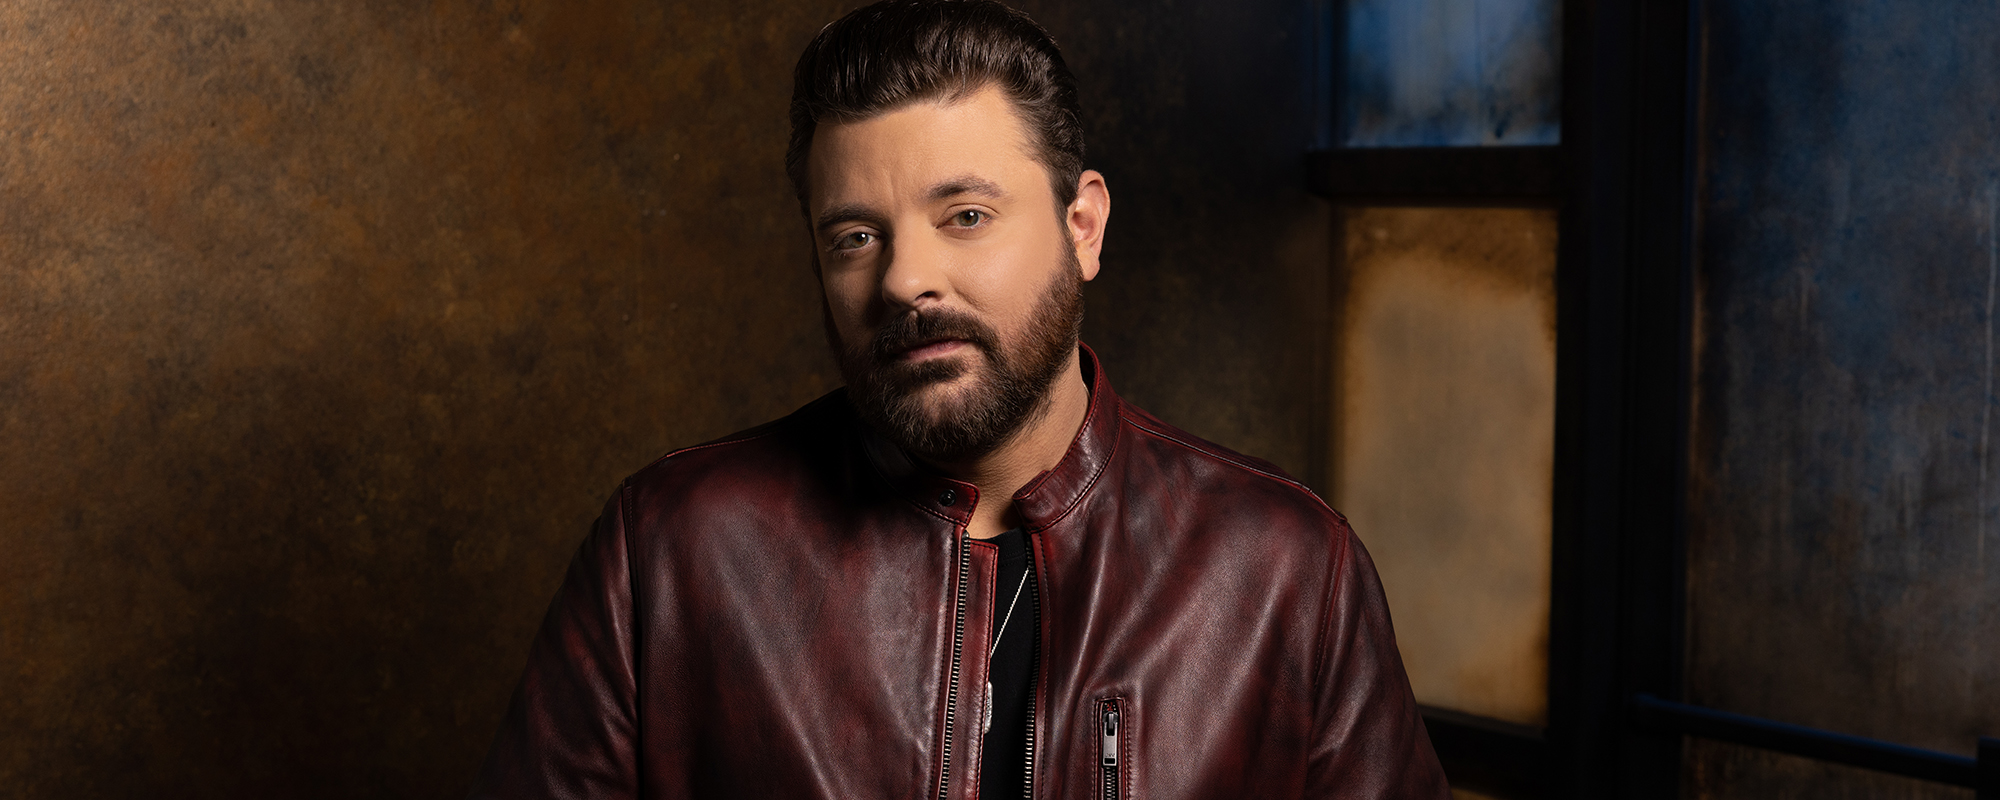 Exclusive: Chris Young Shares Behind-the-Scenes “Looking for You” Clip